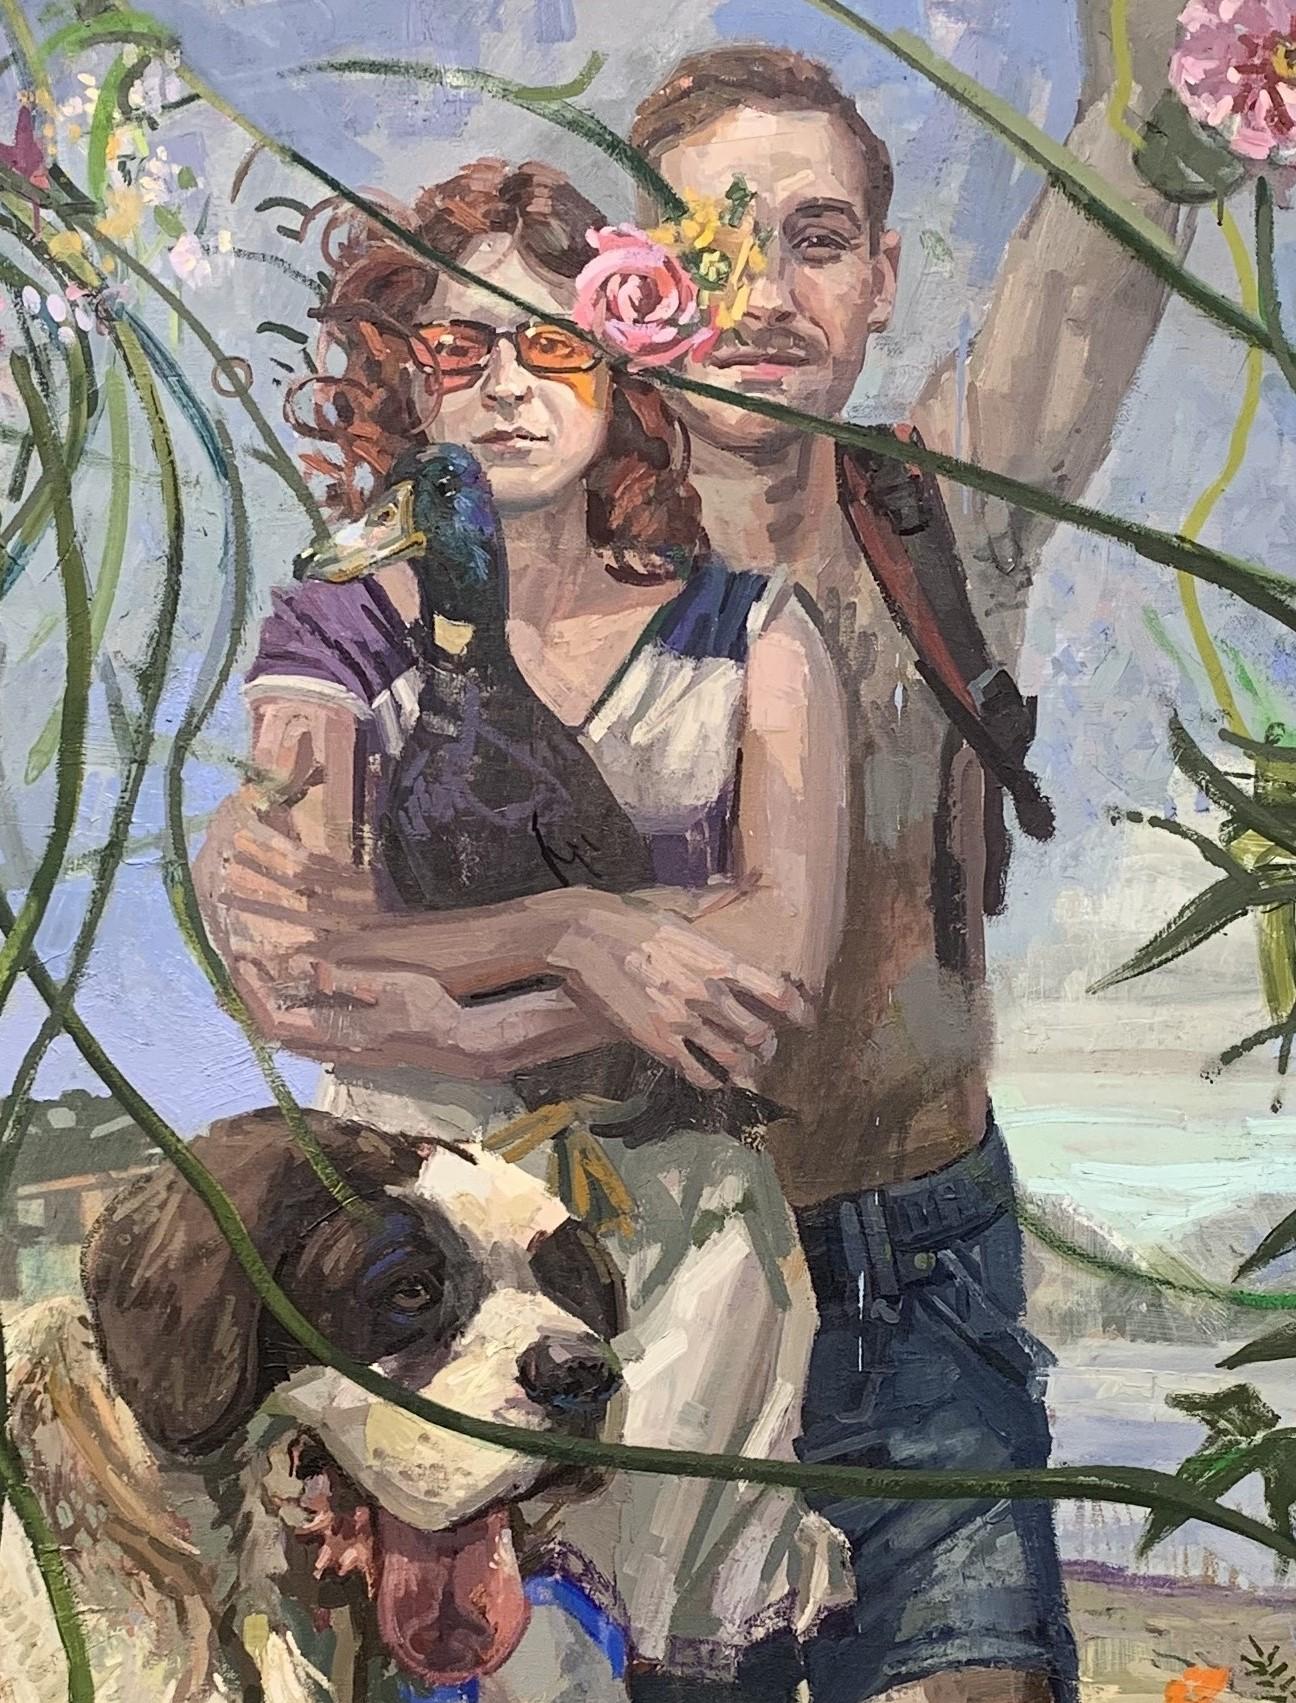 Untitled (In the Garden) - Surreal Scene w/ Couple and Their St. Bernard Dog - Contemporary Painting by Benjamin Duke